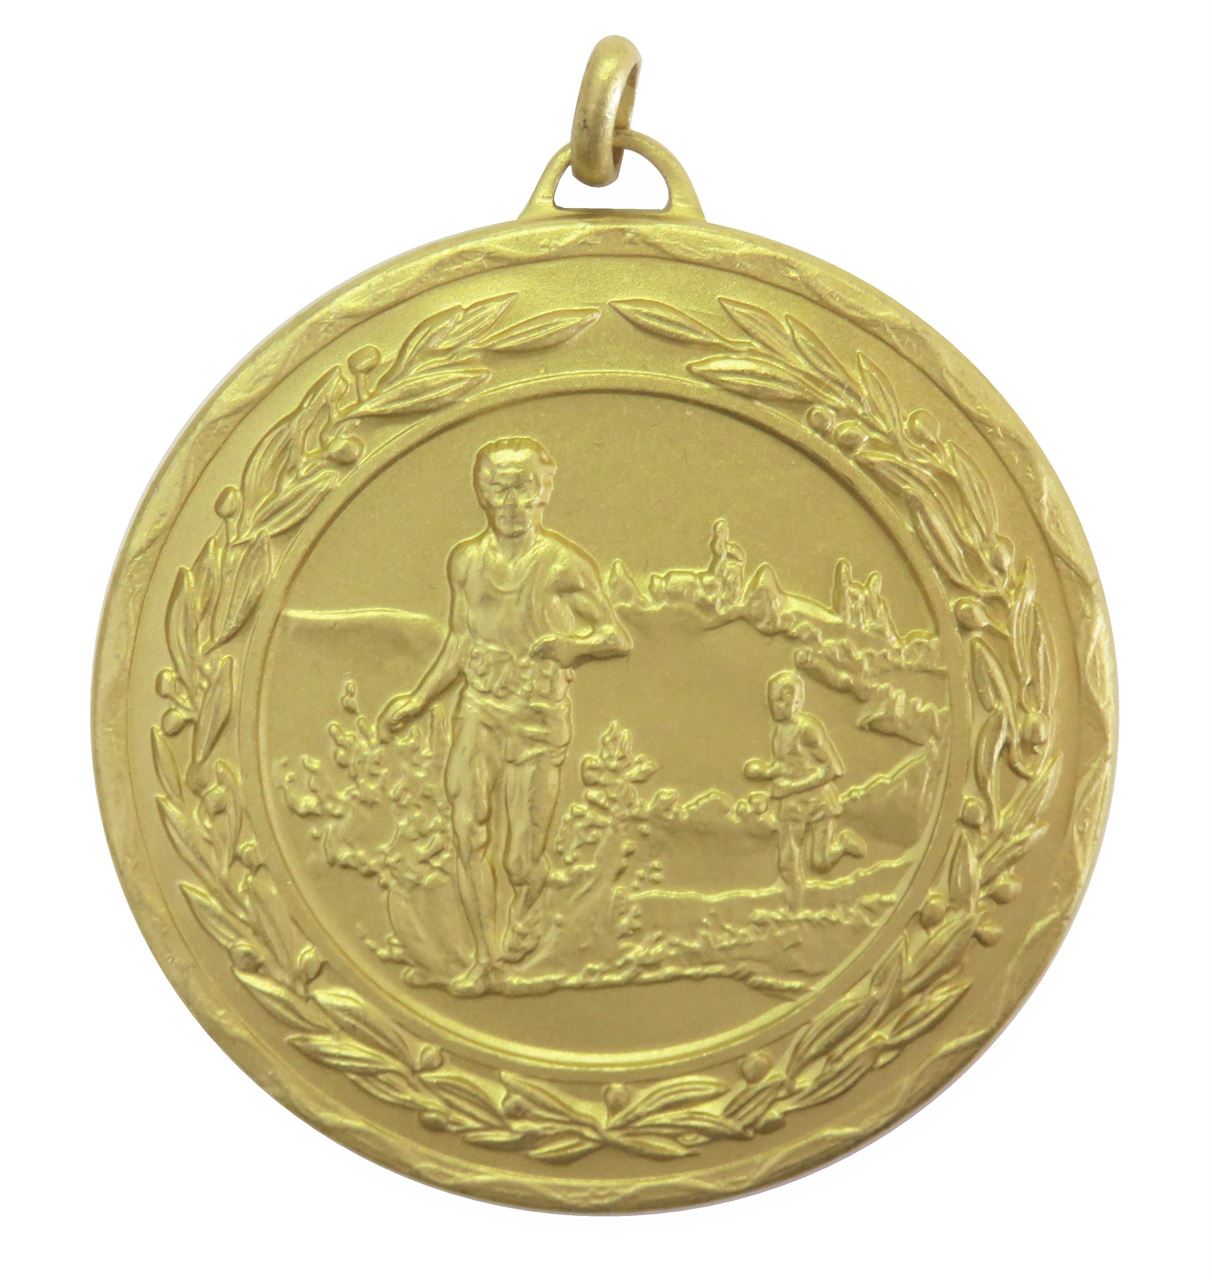 Gold Laurel Economy Cross Country Medal (size: 50mm) - 4110E